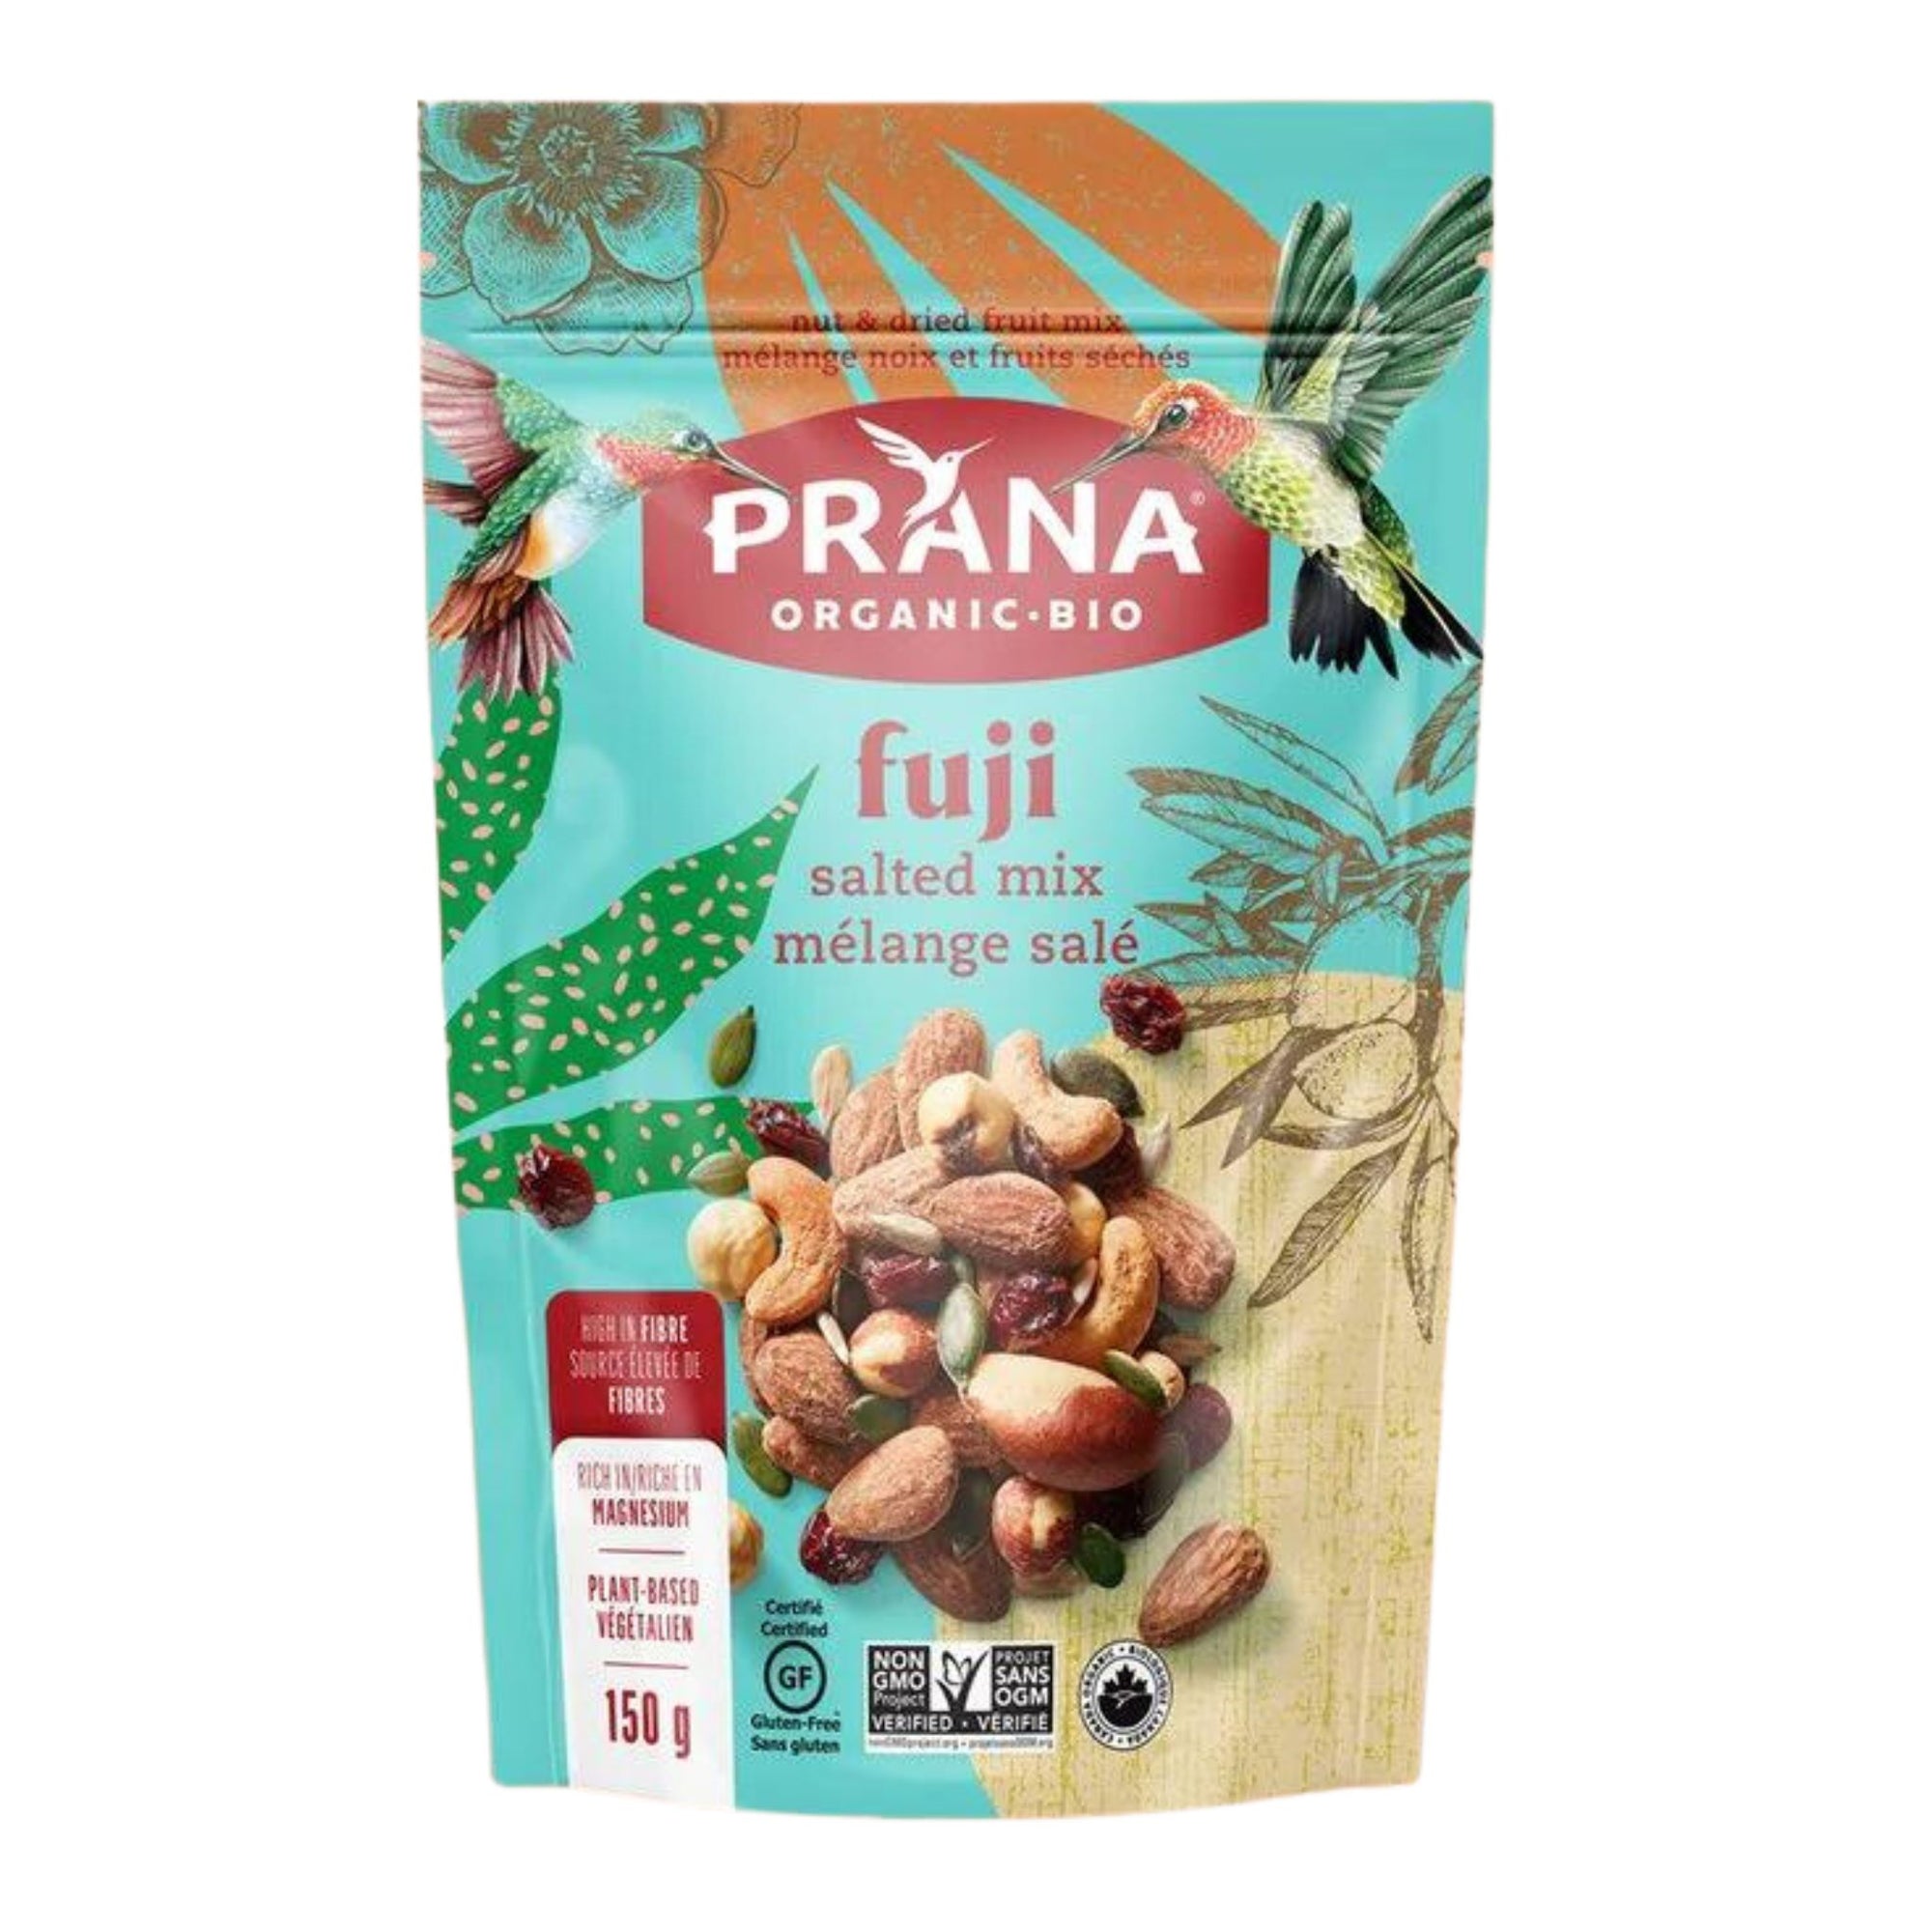 Image of Organic Prana Fuji Mix 150g, a blend of dried fruits and nuts, available at Fiddleheads Health and Nutrition.